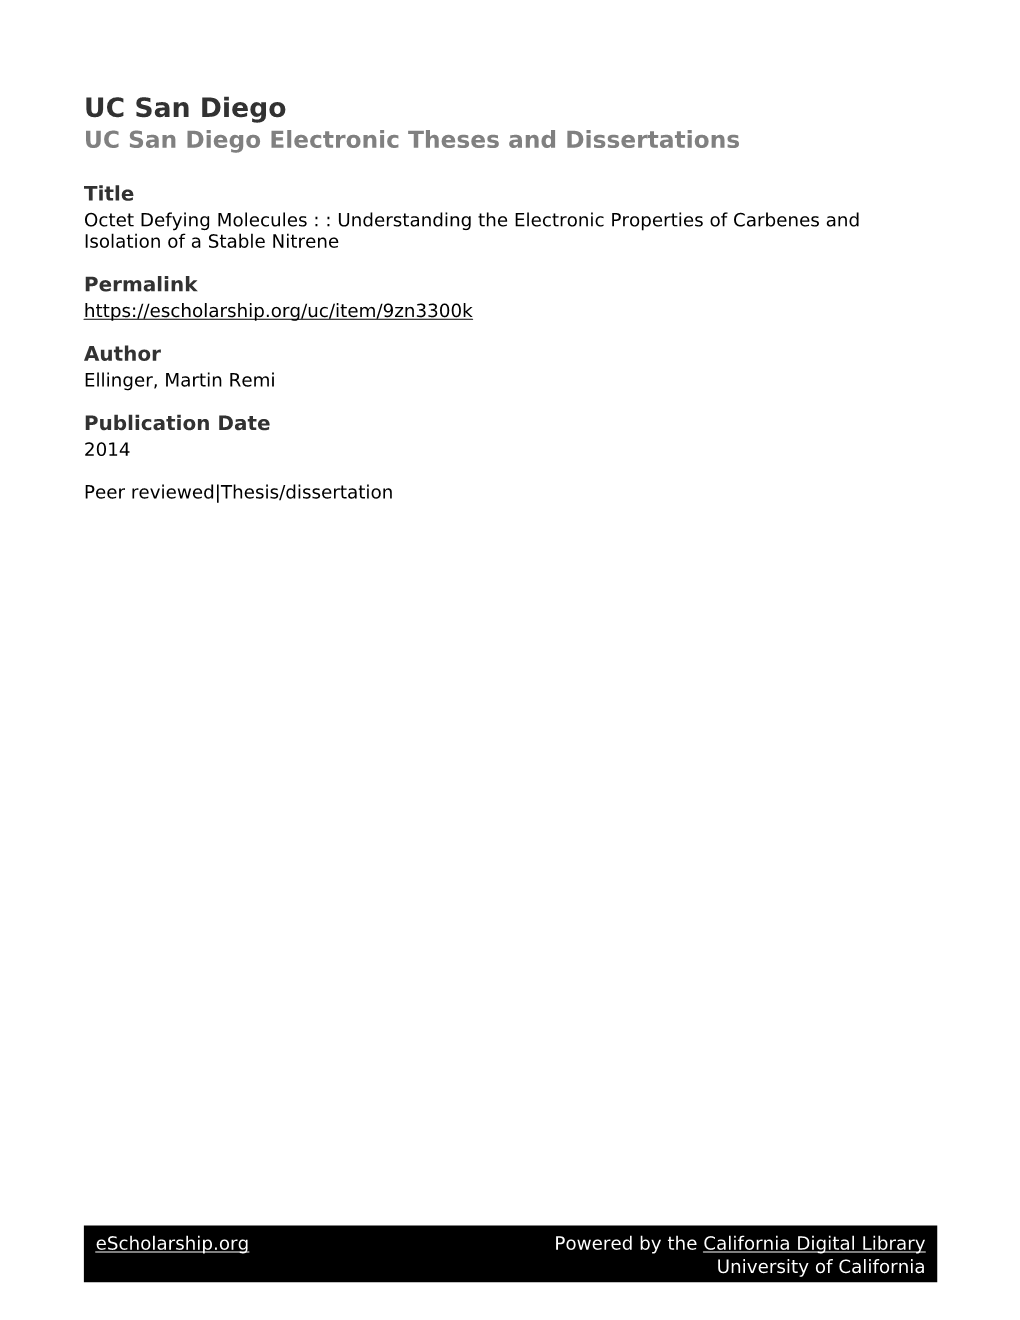 UC San Diego UC San Diego Electronic Theses and Dissertations